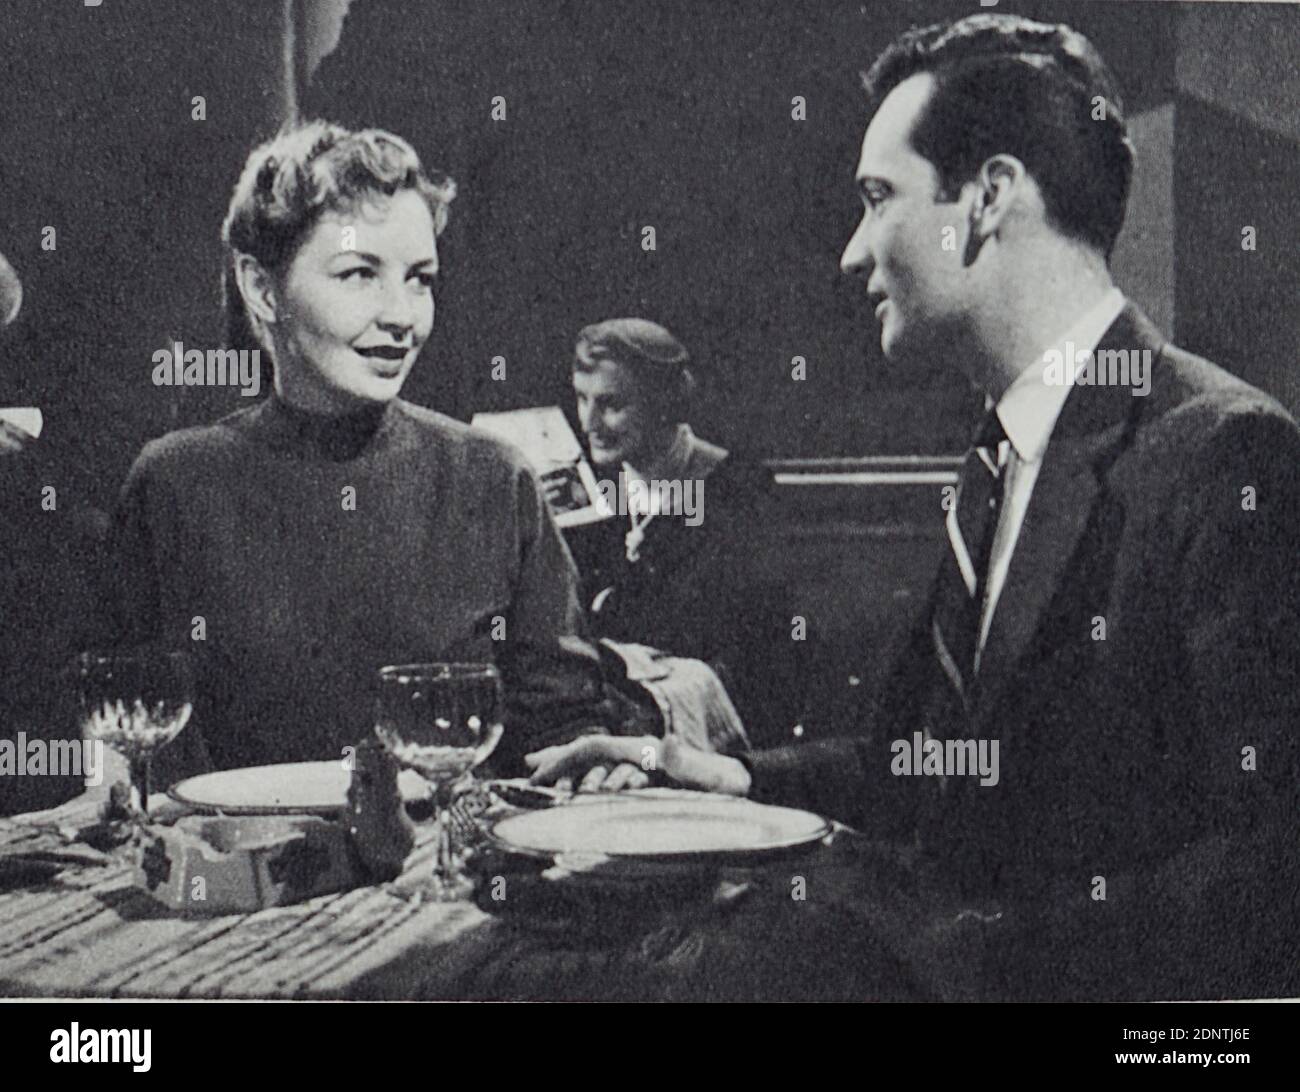 Film still from 'The Young Lovers' starring Paul Carpenter, Theodore Bikel, David Kossoff, and Odile Versois. Stock Photo